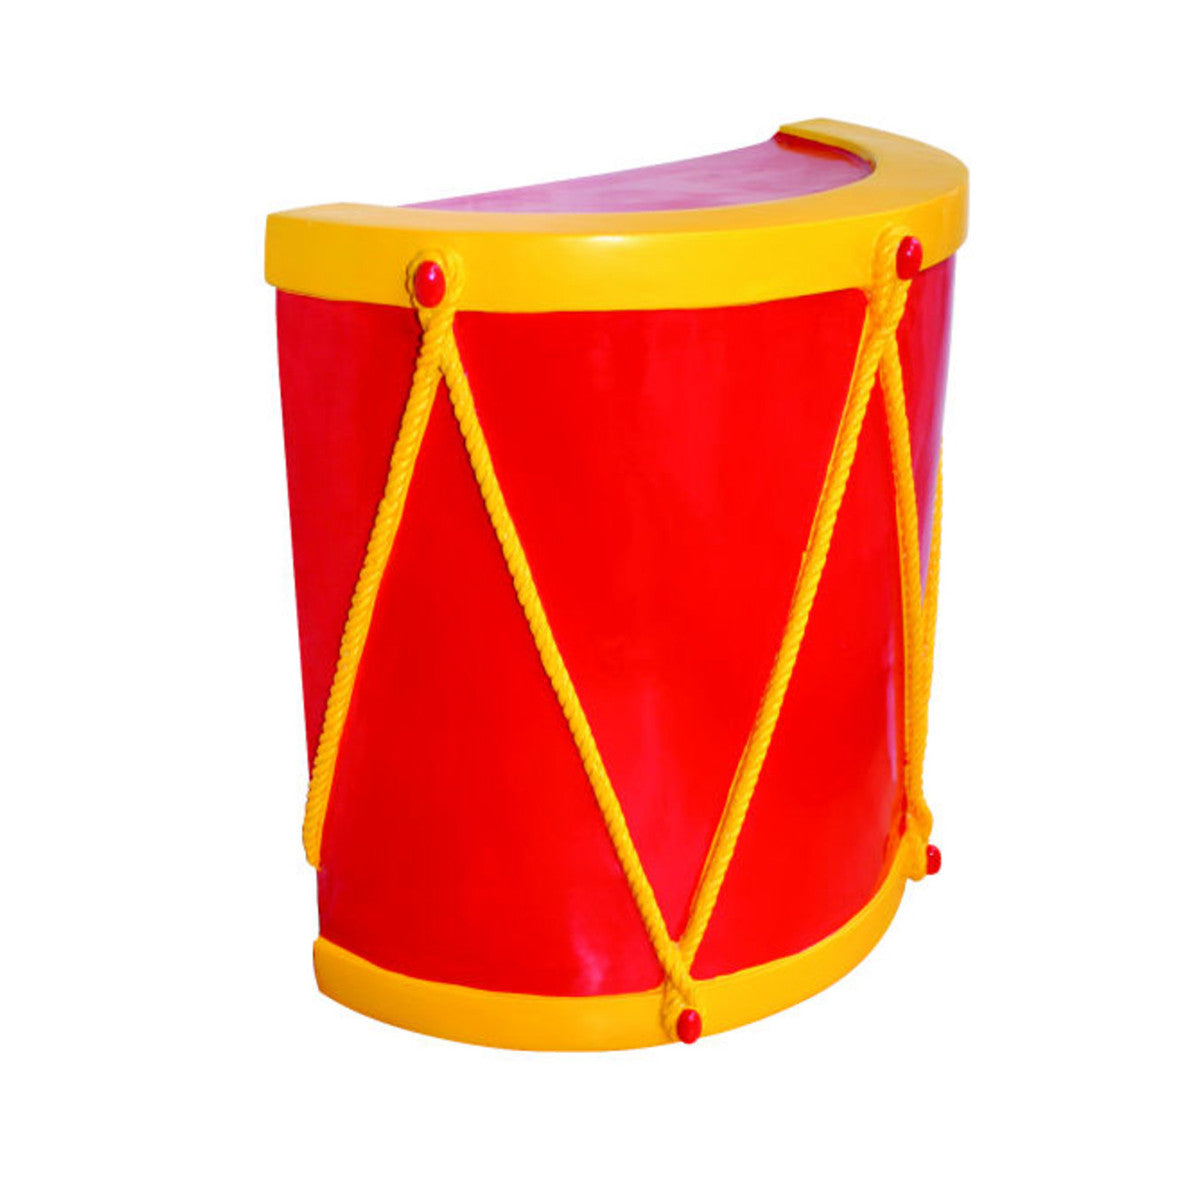 Barcana Live Form Half Red Drum Stand with Yellow Accents